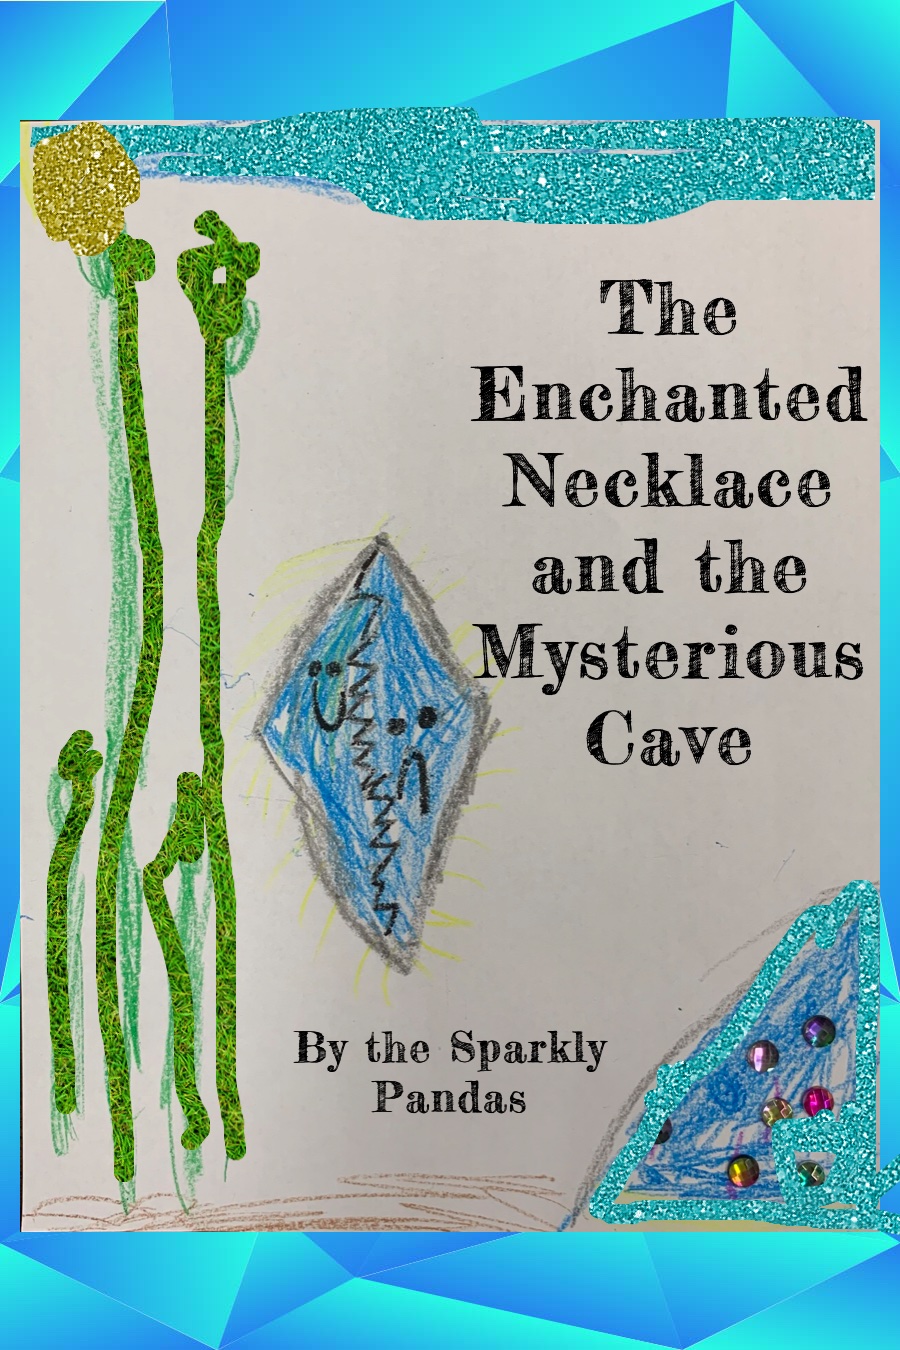 Lemur Library Friendly Edition The Enchanted Necklace and the Mysterious Cave by SF Glen Park – July 24 – 1st Grade